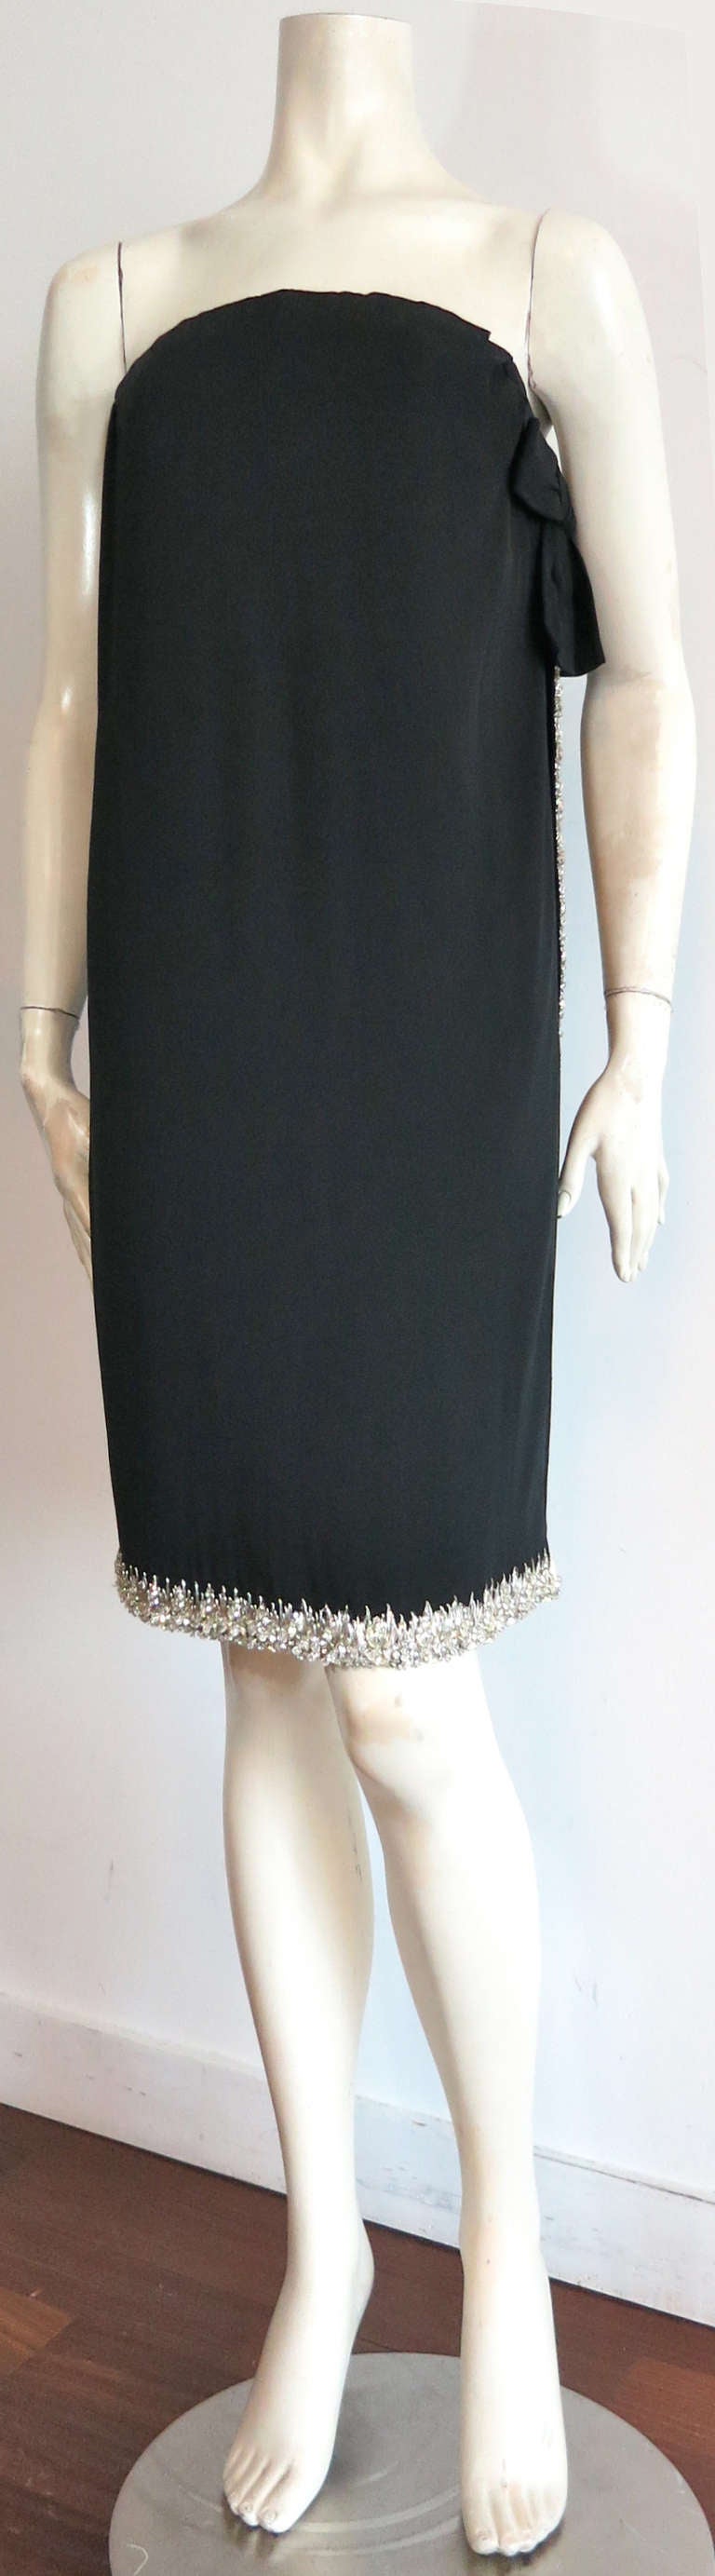 1965 CHRISTIAN DIOR Haute Couture Numbered black silk dress.

This elegant, haute couture dress was designed by Marc Bohan for the house of Dior in France for the Spring of 1965, and is numbered '126870'.

The dress is made of black silk crepe,